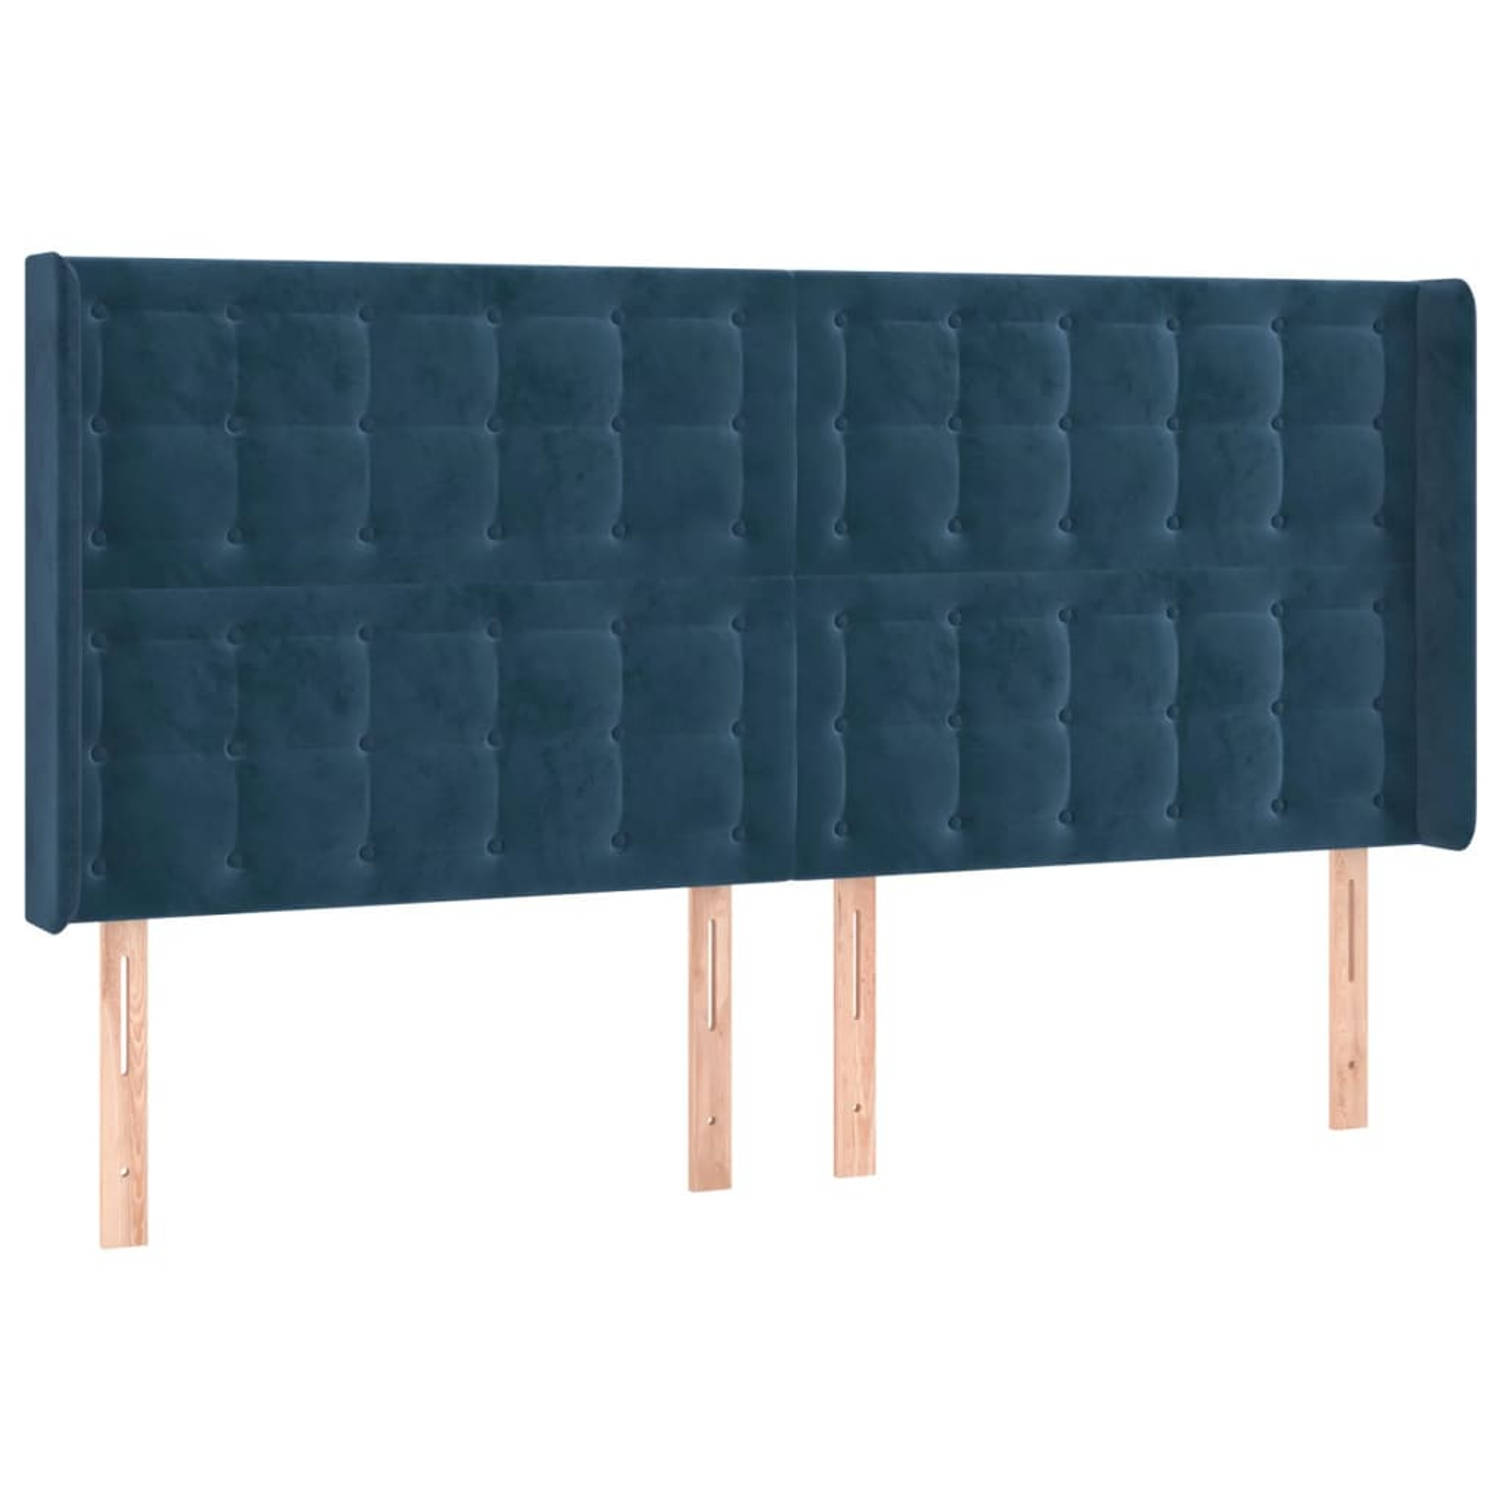 The Living Store Hoofdbord - 203 x 16 x 118/128 cm - Donkerblauw The Living Store